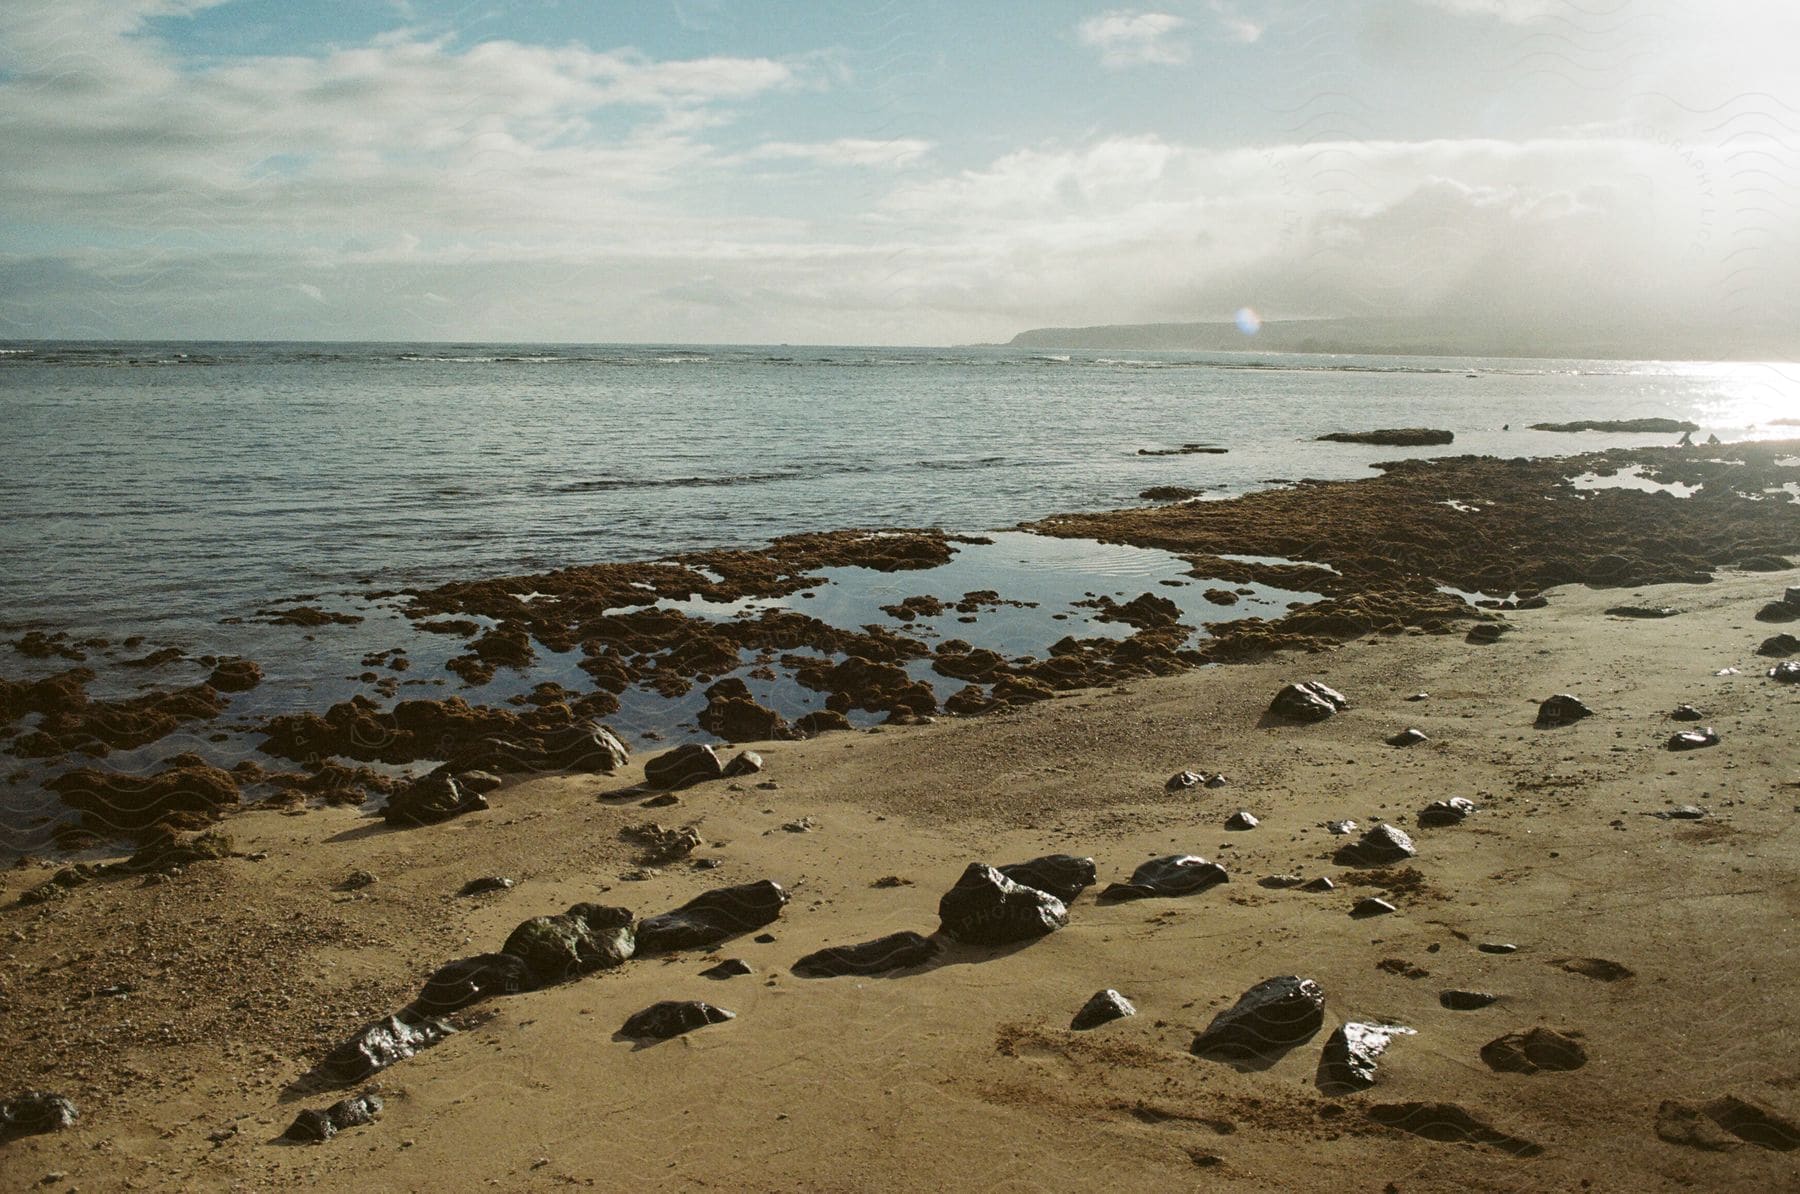 A sand covered beach also contains numerous rocks scattered across its surface.